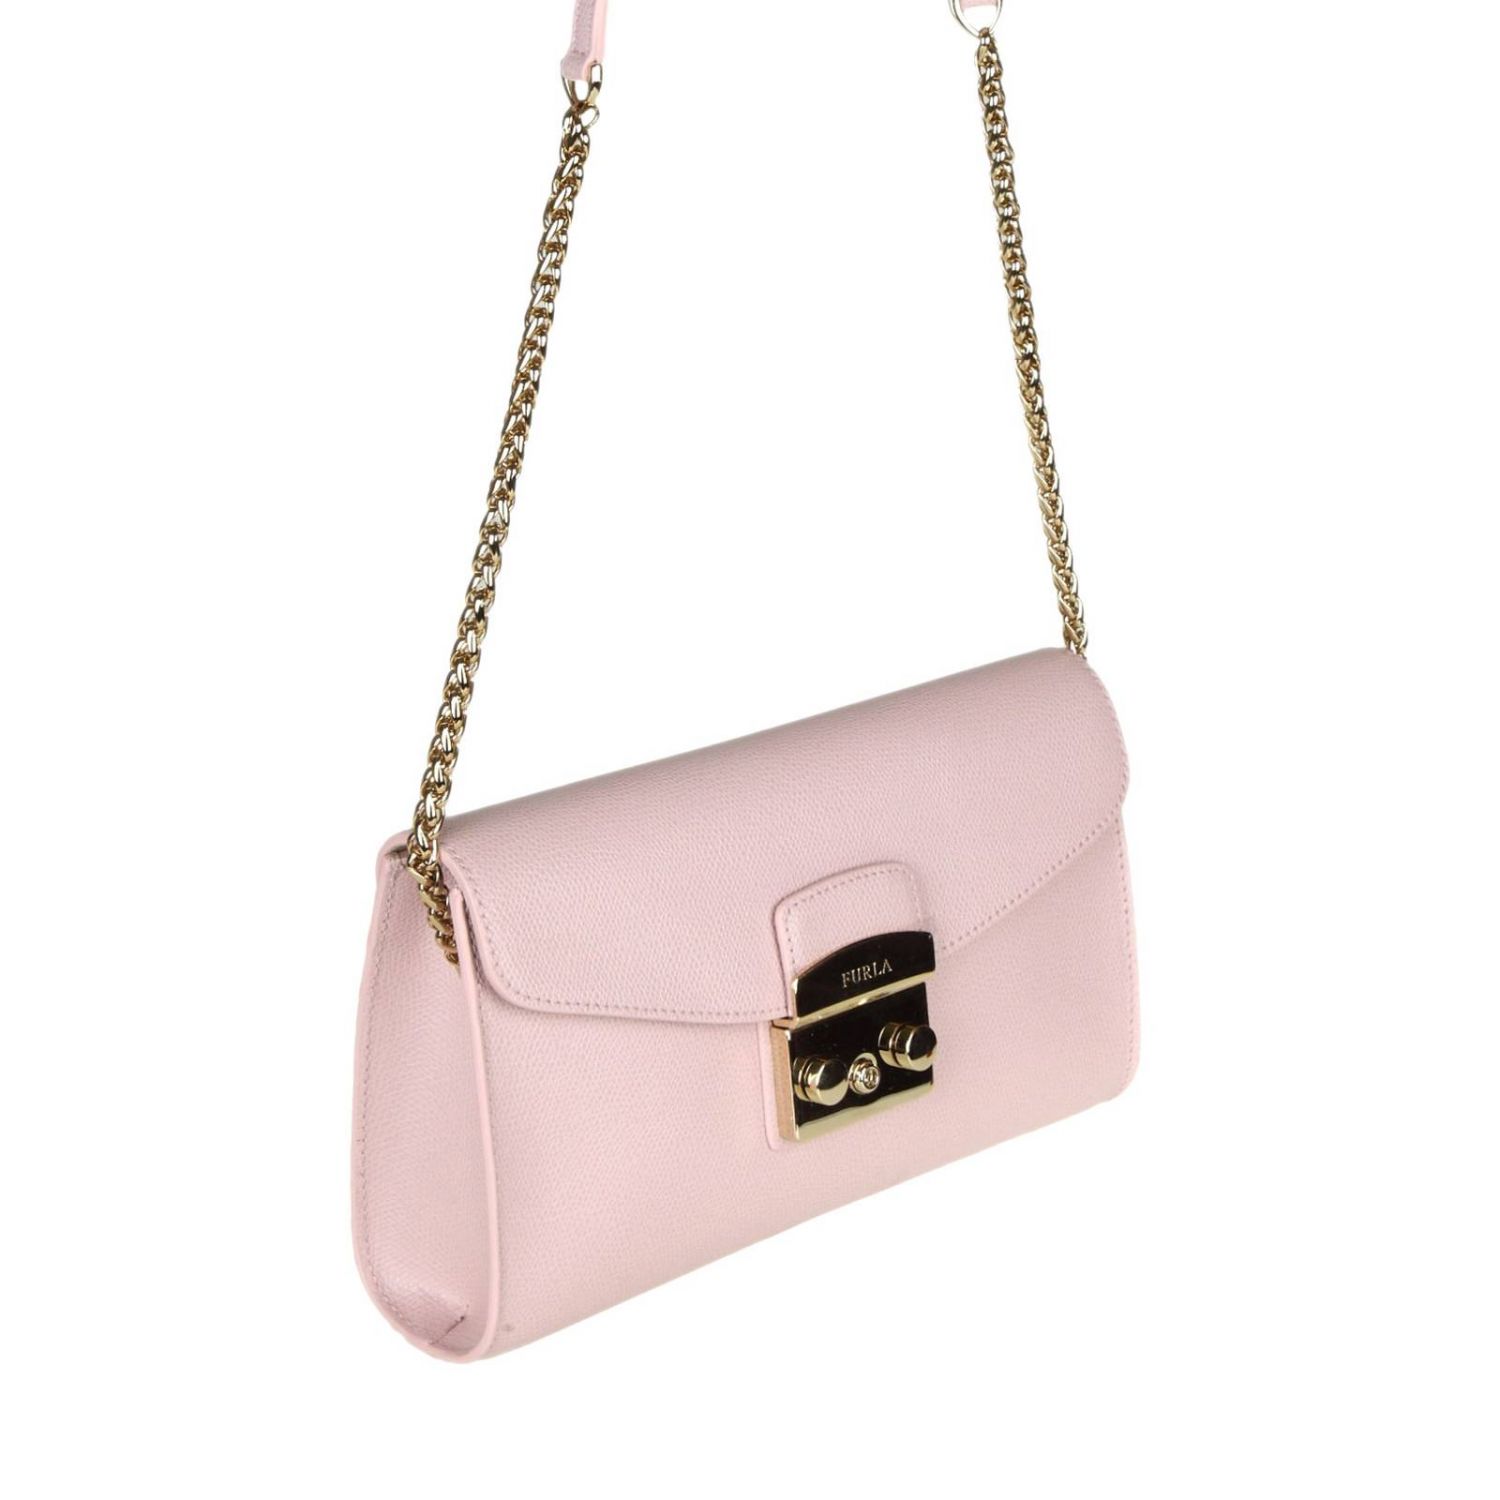 Furla Outlet: Metropolis S clutch bag in textured leather with shoulder ...